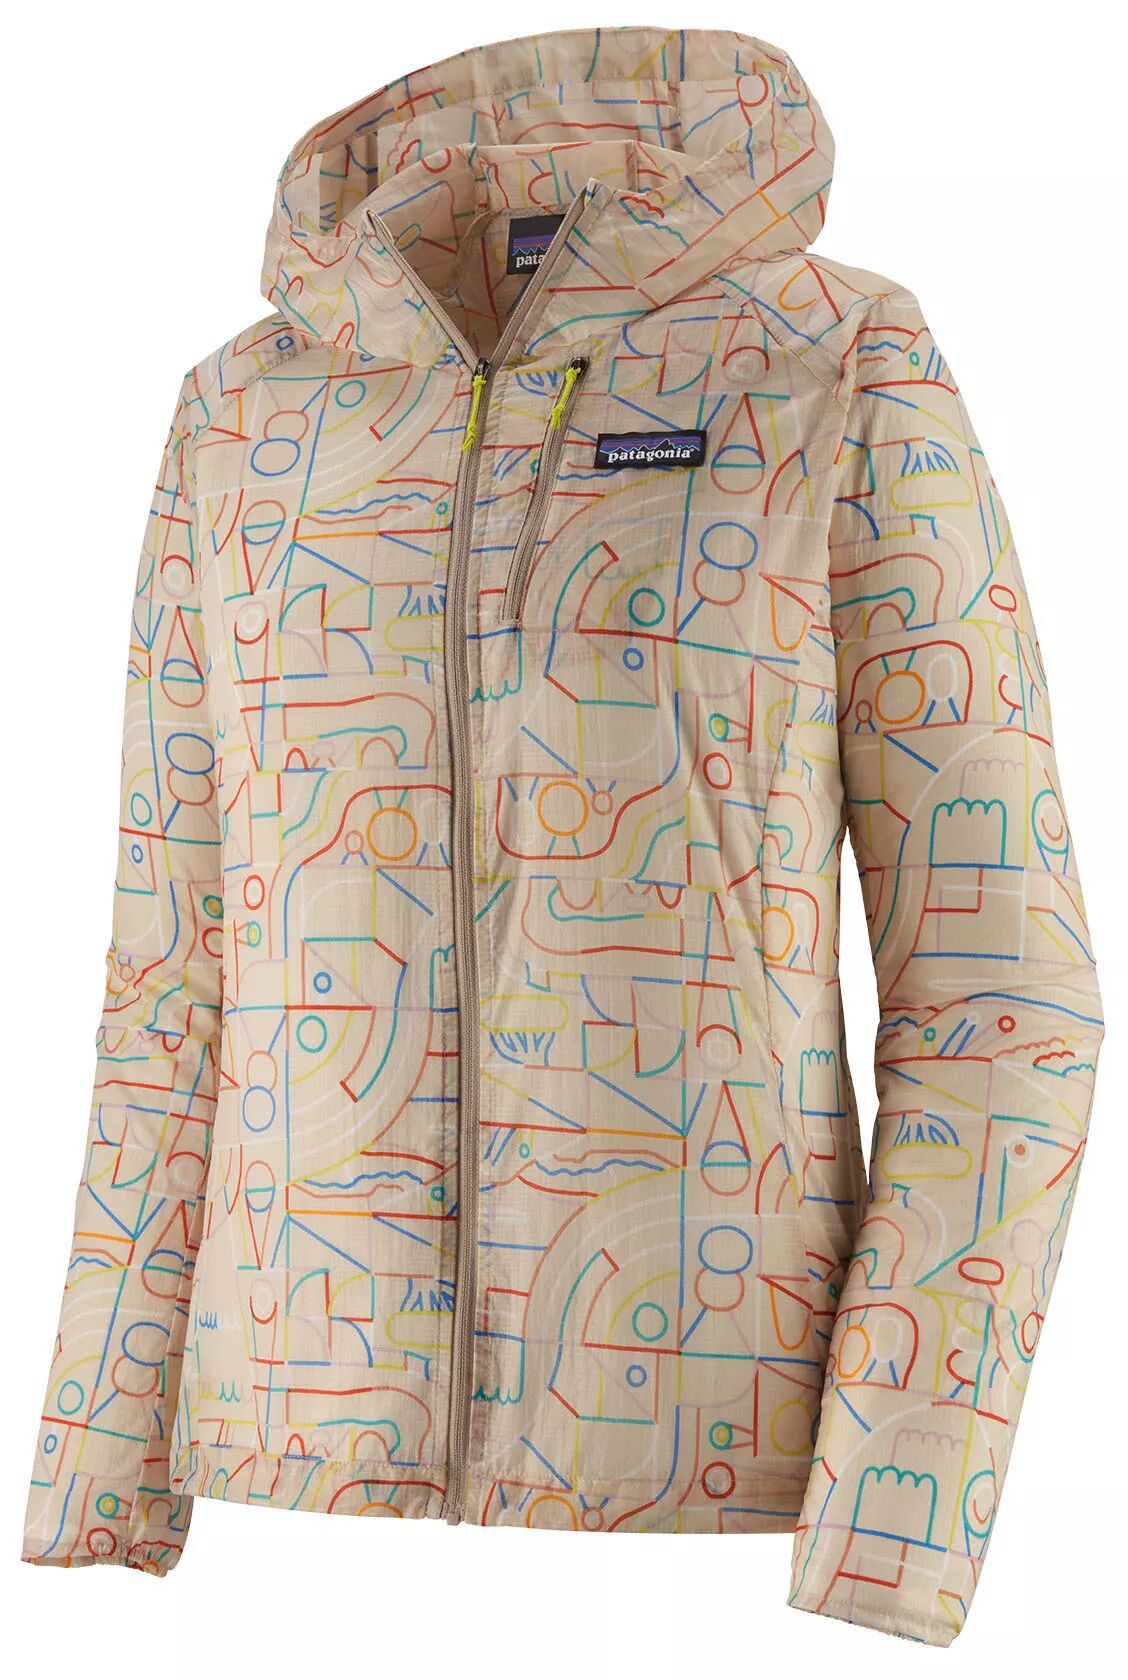 Patagonia Women's Houdini Jacket, Large, Lose Yourself Outline Pum